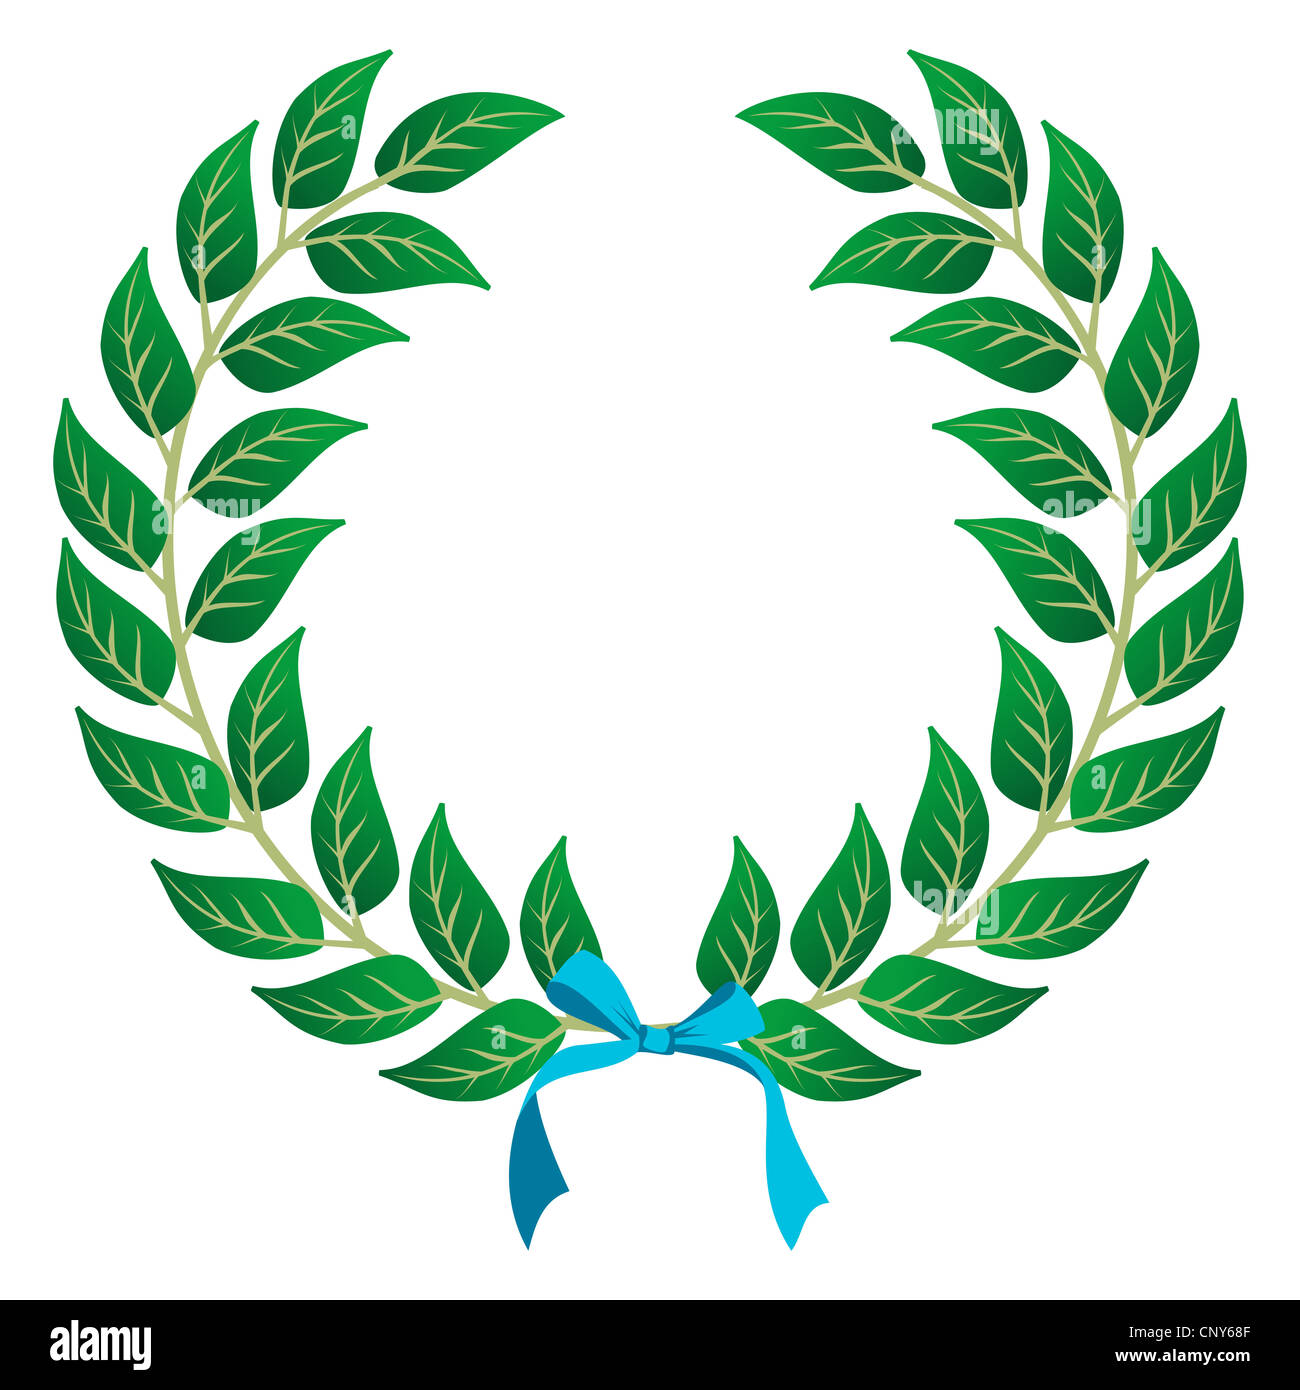 Laurel wreath with a sky blue ribbon over white background. Vector file layered for easy manipulation and customisation. Stock Photo